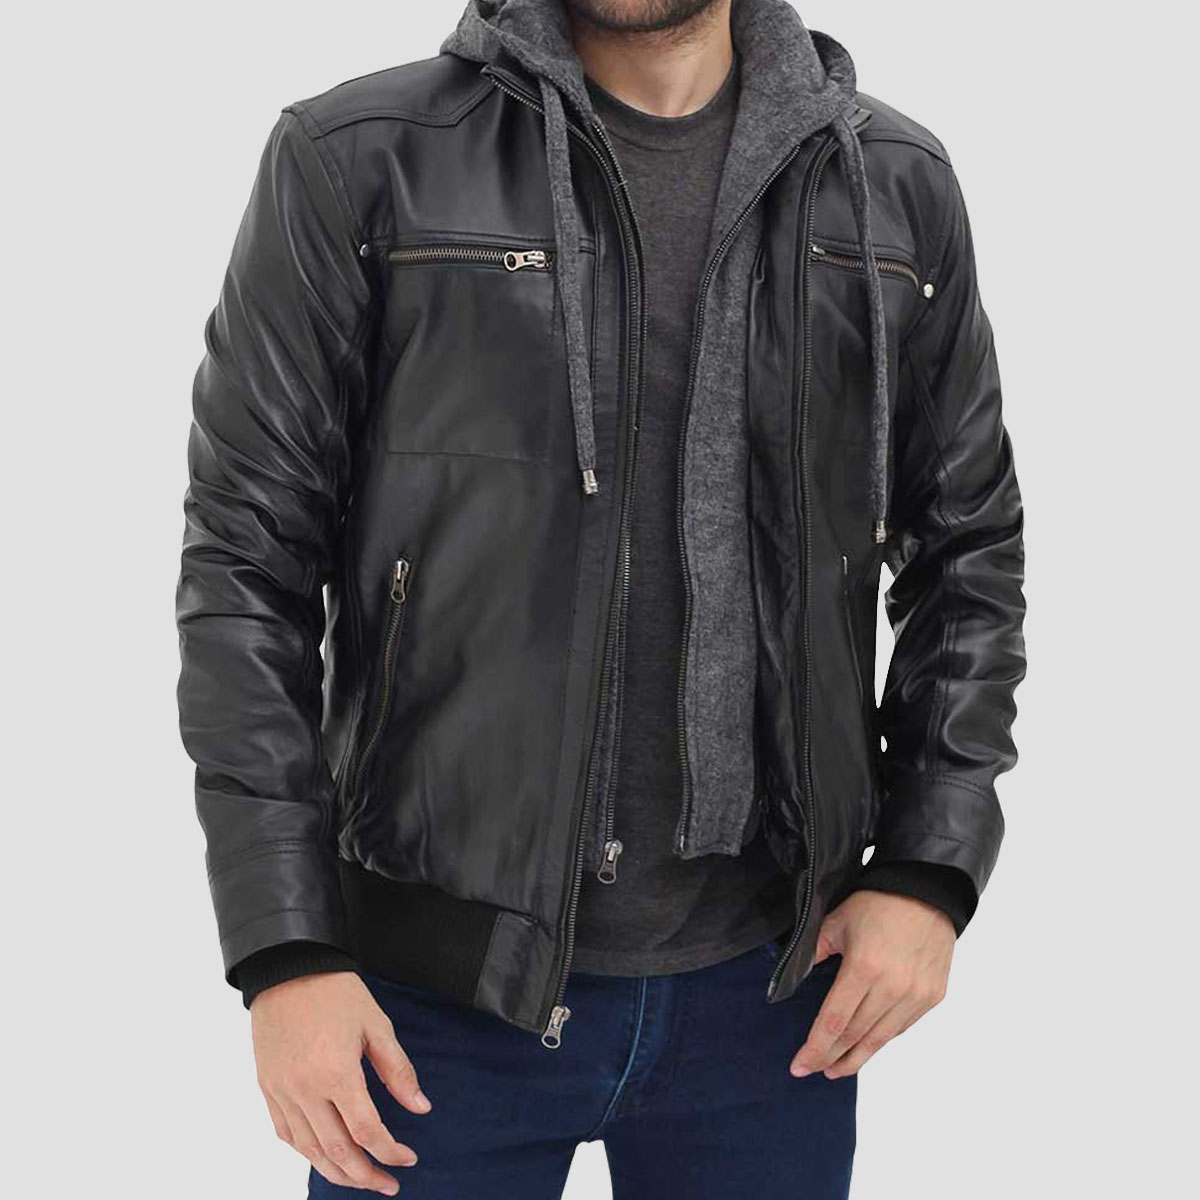 Black Leather Bomber Jacket with Removable Hood - The Vintage Leather